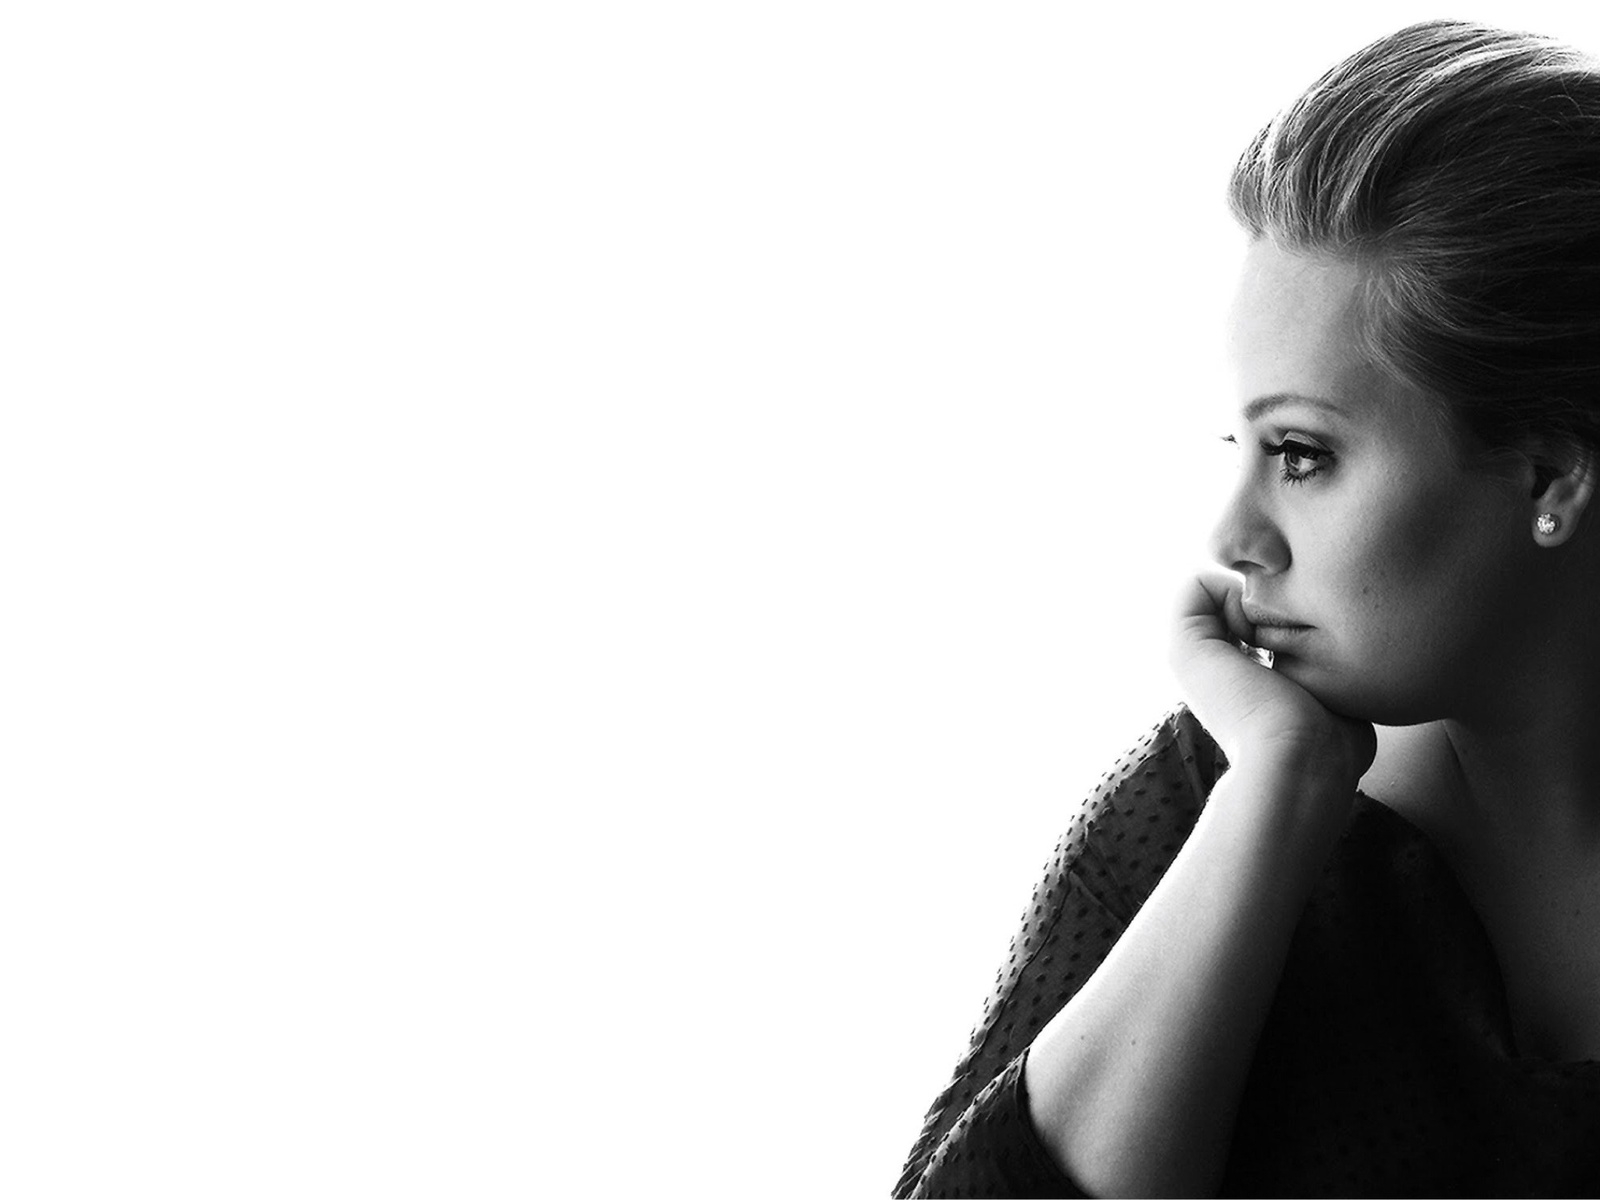 Adele Black and White for 1600 x 1200 resolution